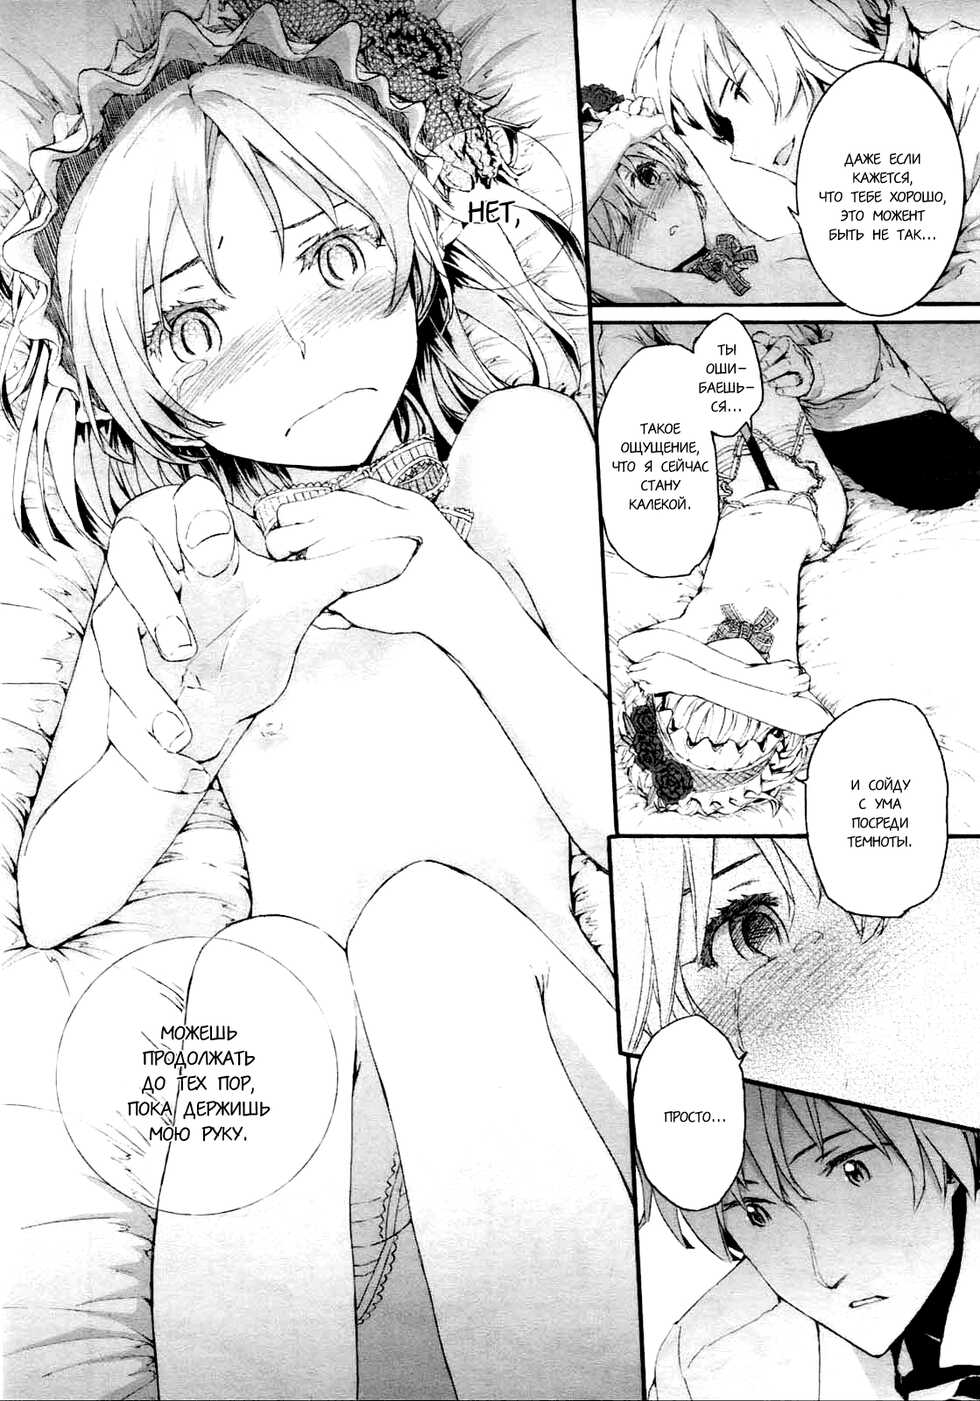 [Sumiya] Gothic | Готика (COMIC LO 2010-09) [Russian] [LoliconTeam] - Page 10